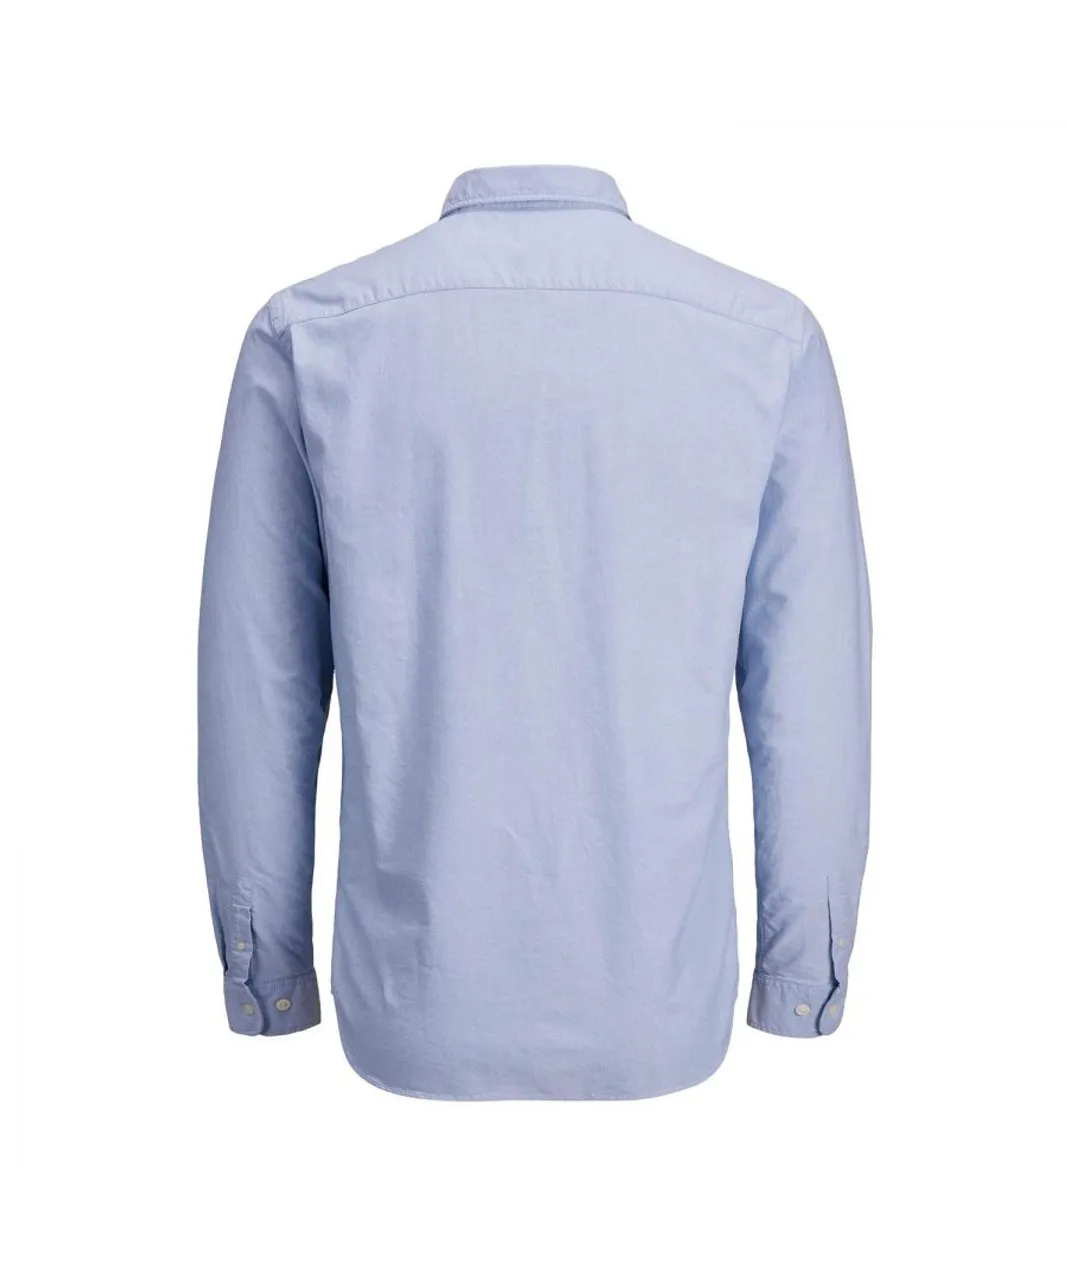 Jack & Jones Mens Shirt Long Sleeve with Collars Slim Fit Casual Top Wear - Blue Cotton